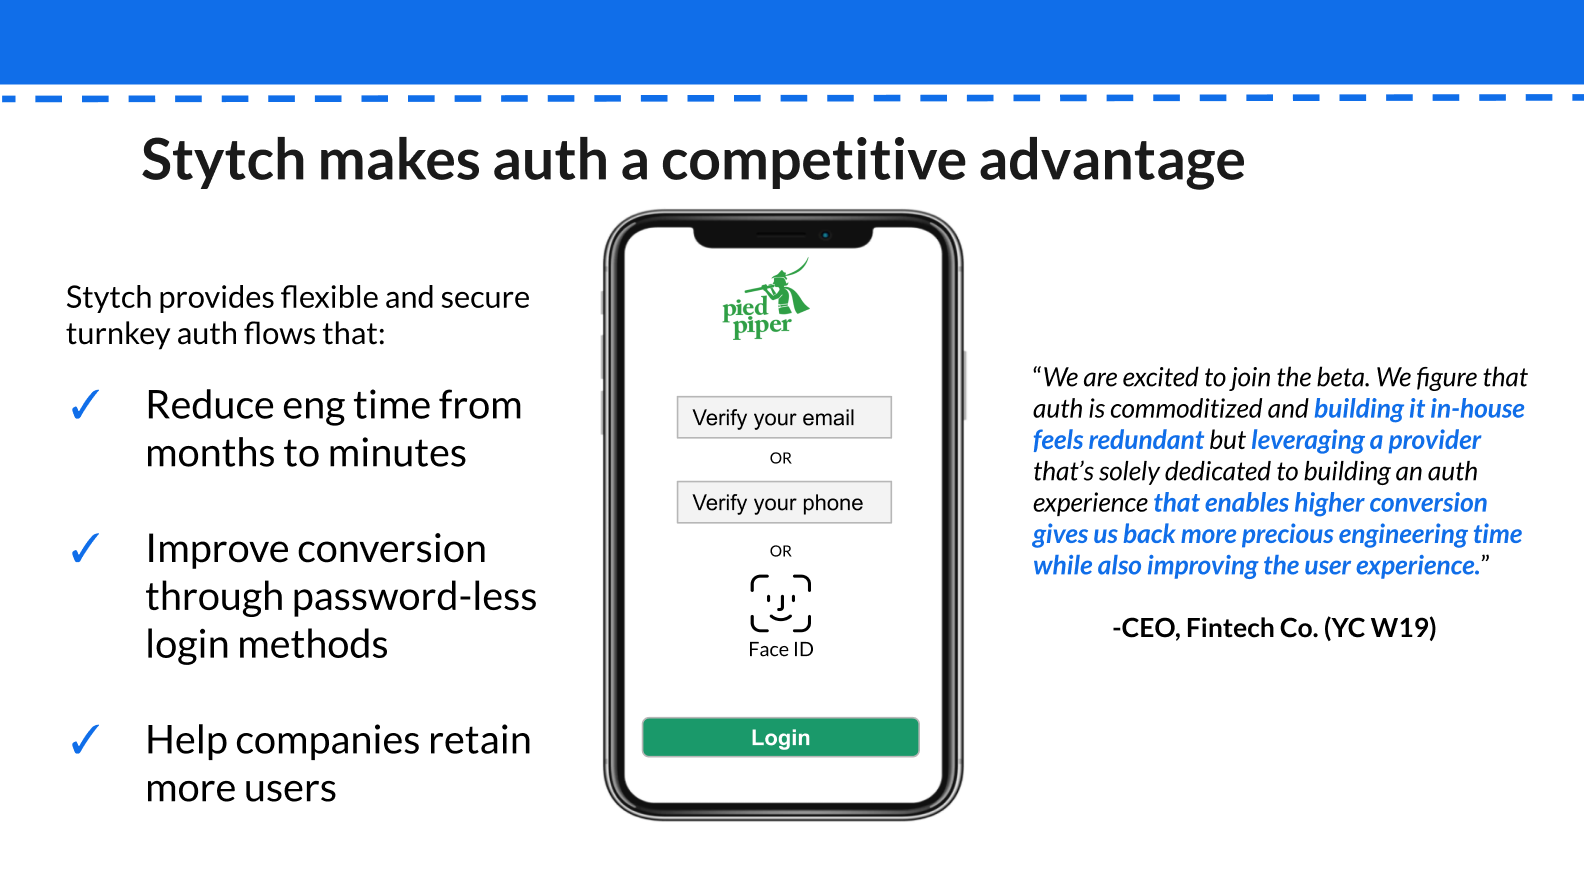 Image of a blue & white power point slide titled "Stytch makes auth a competitive advantage," with three supporting bullets:
- Reduce eng time from months to minutes
- Improve conversion through passwordless login methods
- Help companies retain more users